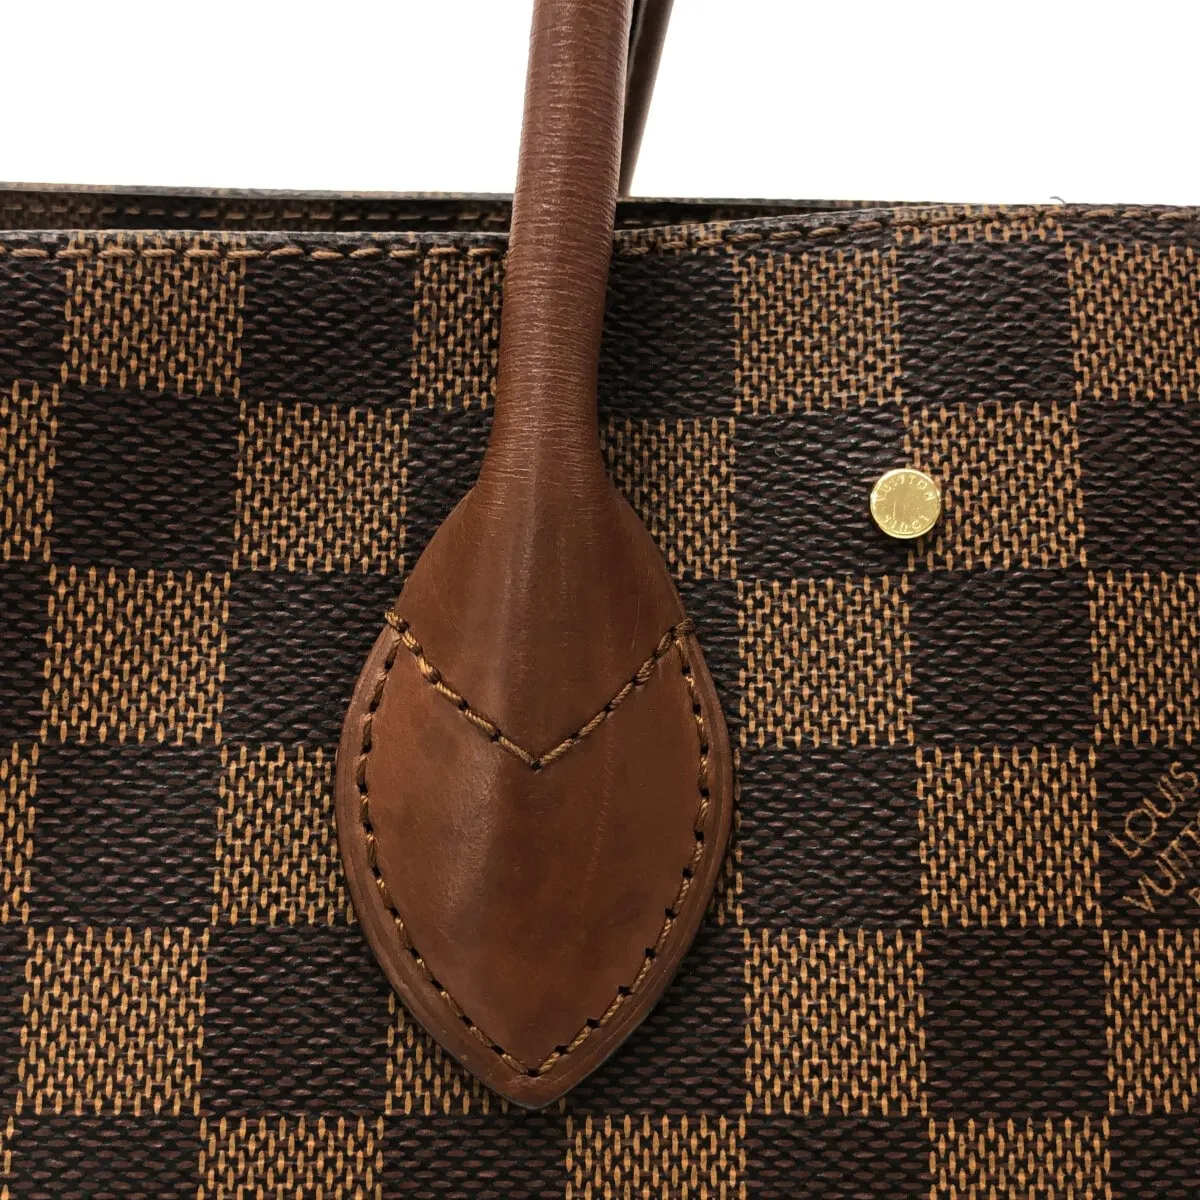 LOUIS VUITTON(ルイヴィトン) ハンドバッグ ダミエ アスコット N41273 ...